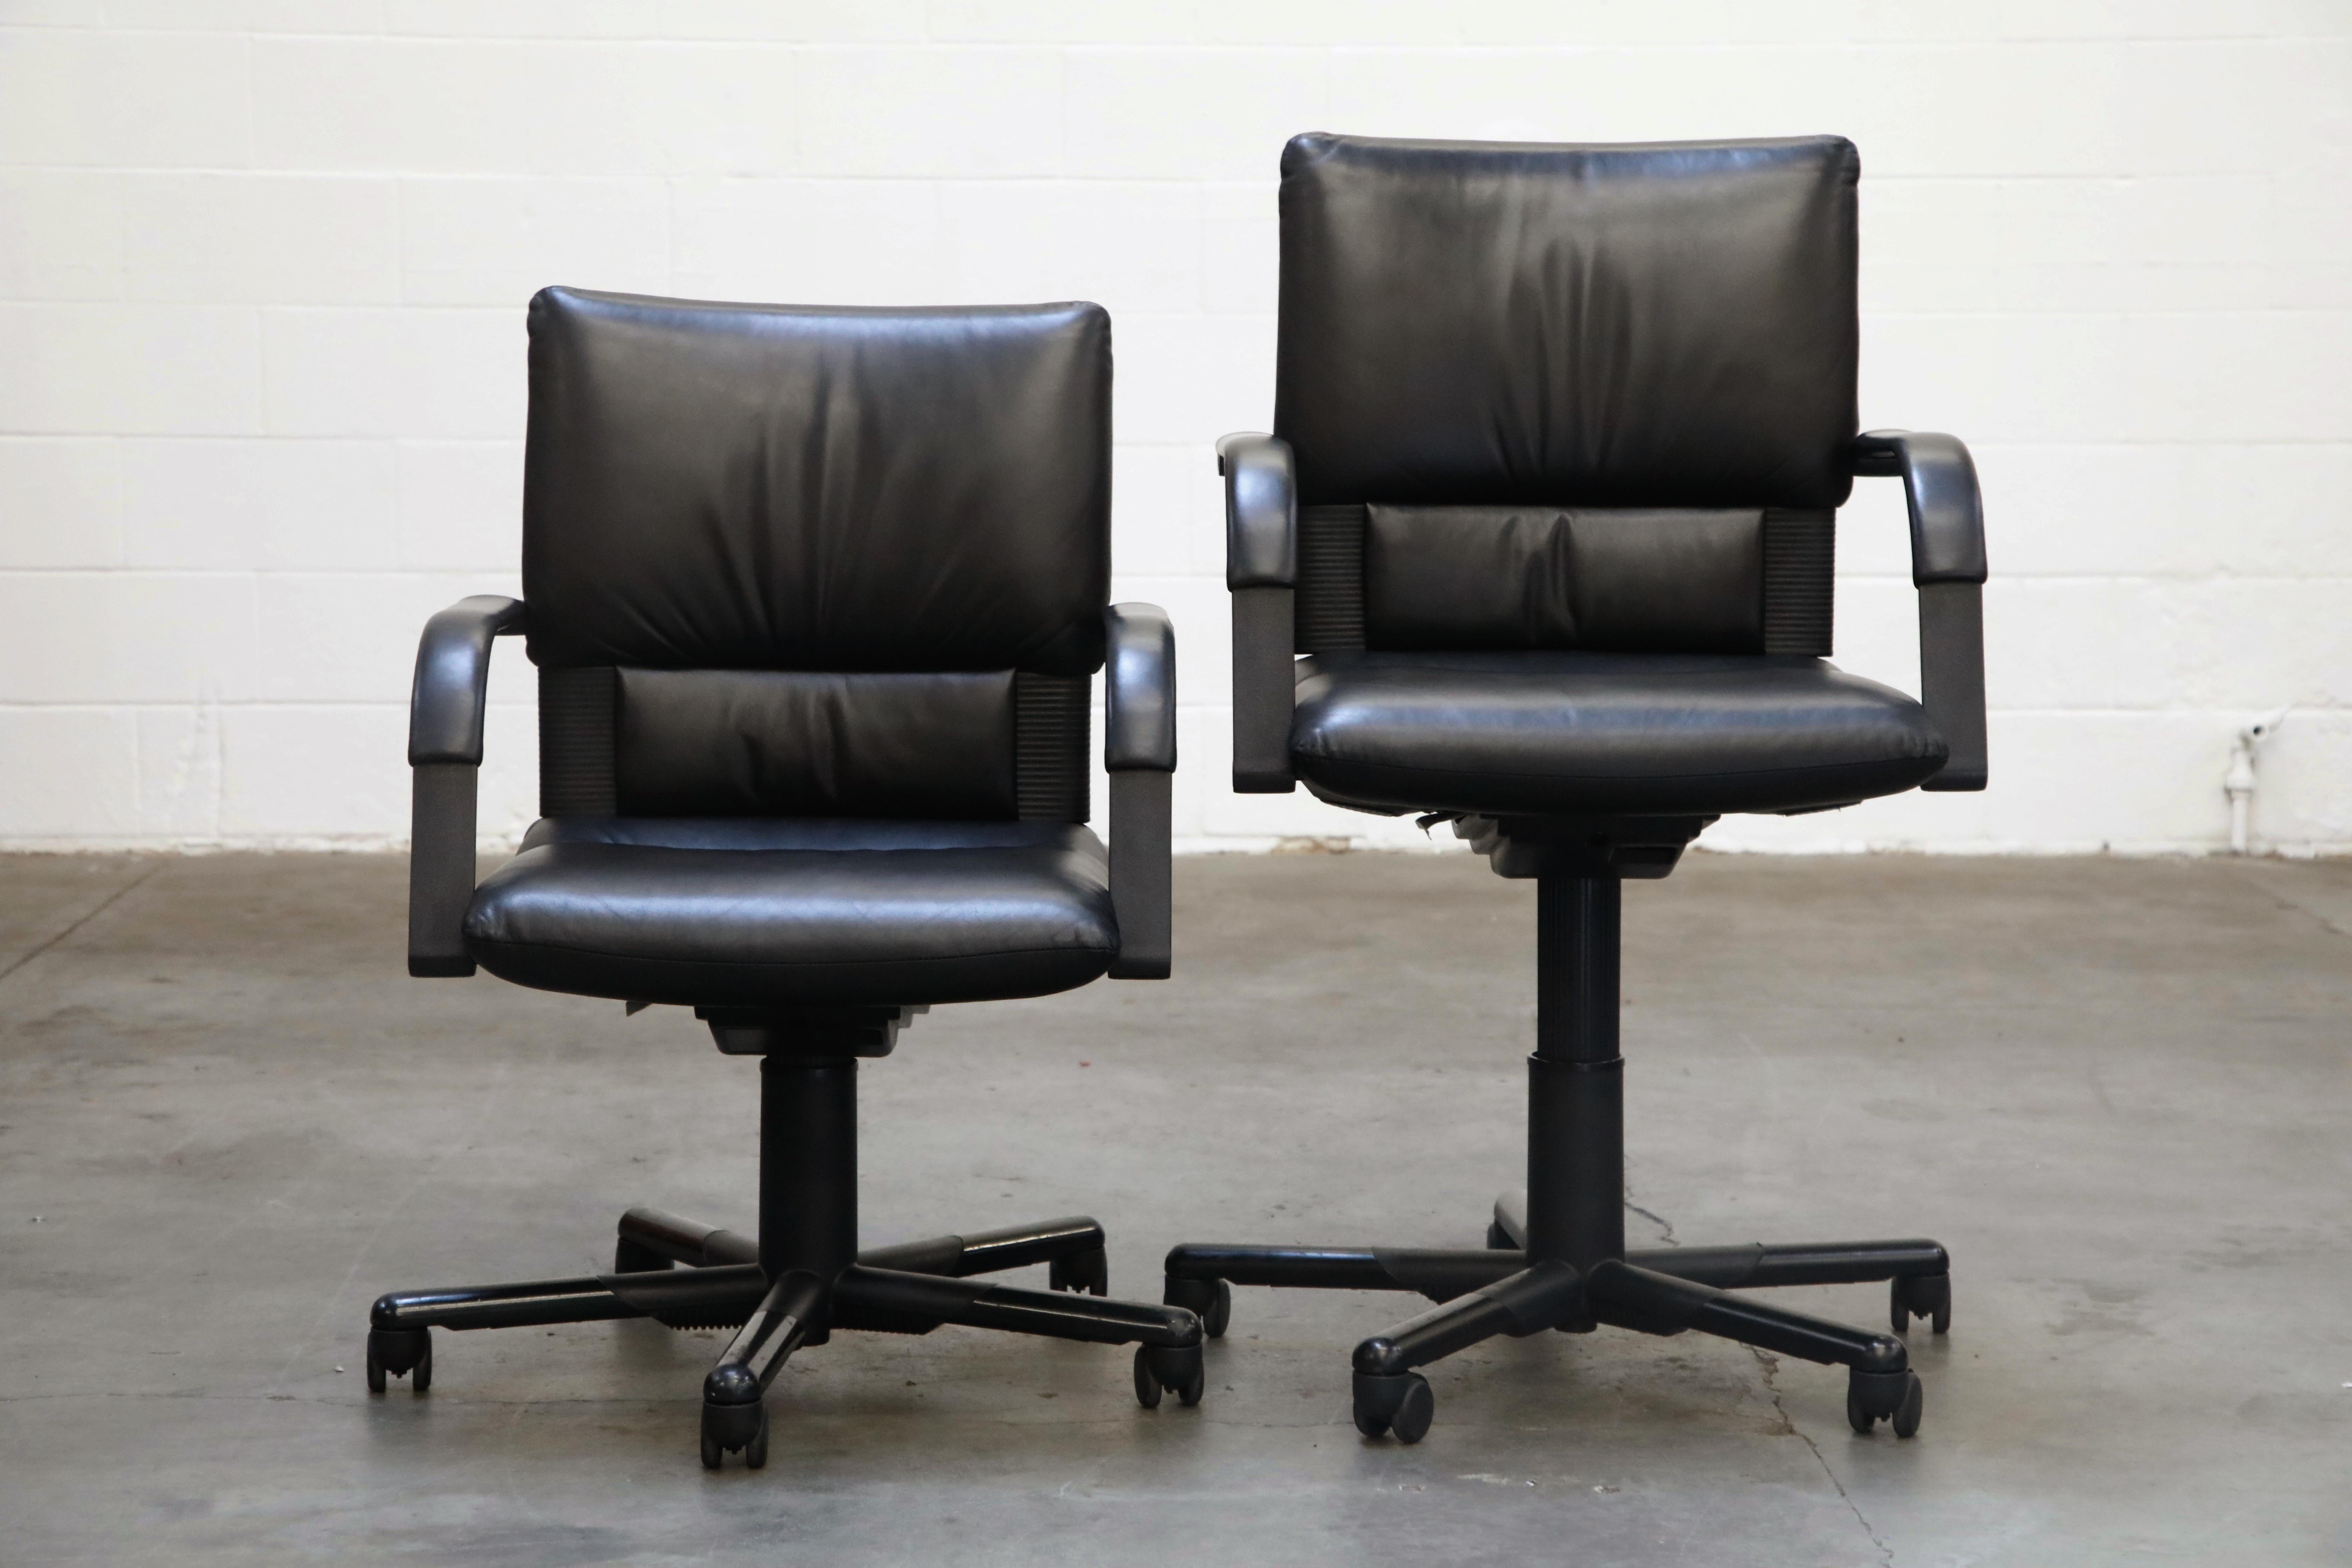 Leather Mario Bellini Post-Modern Executive Desk Chair for Vitra, Signed and Dated 1992 For Sale